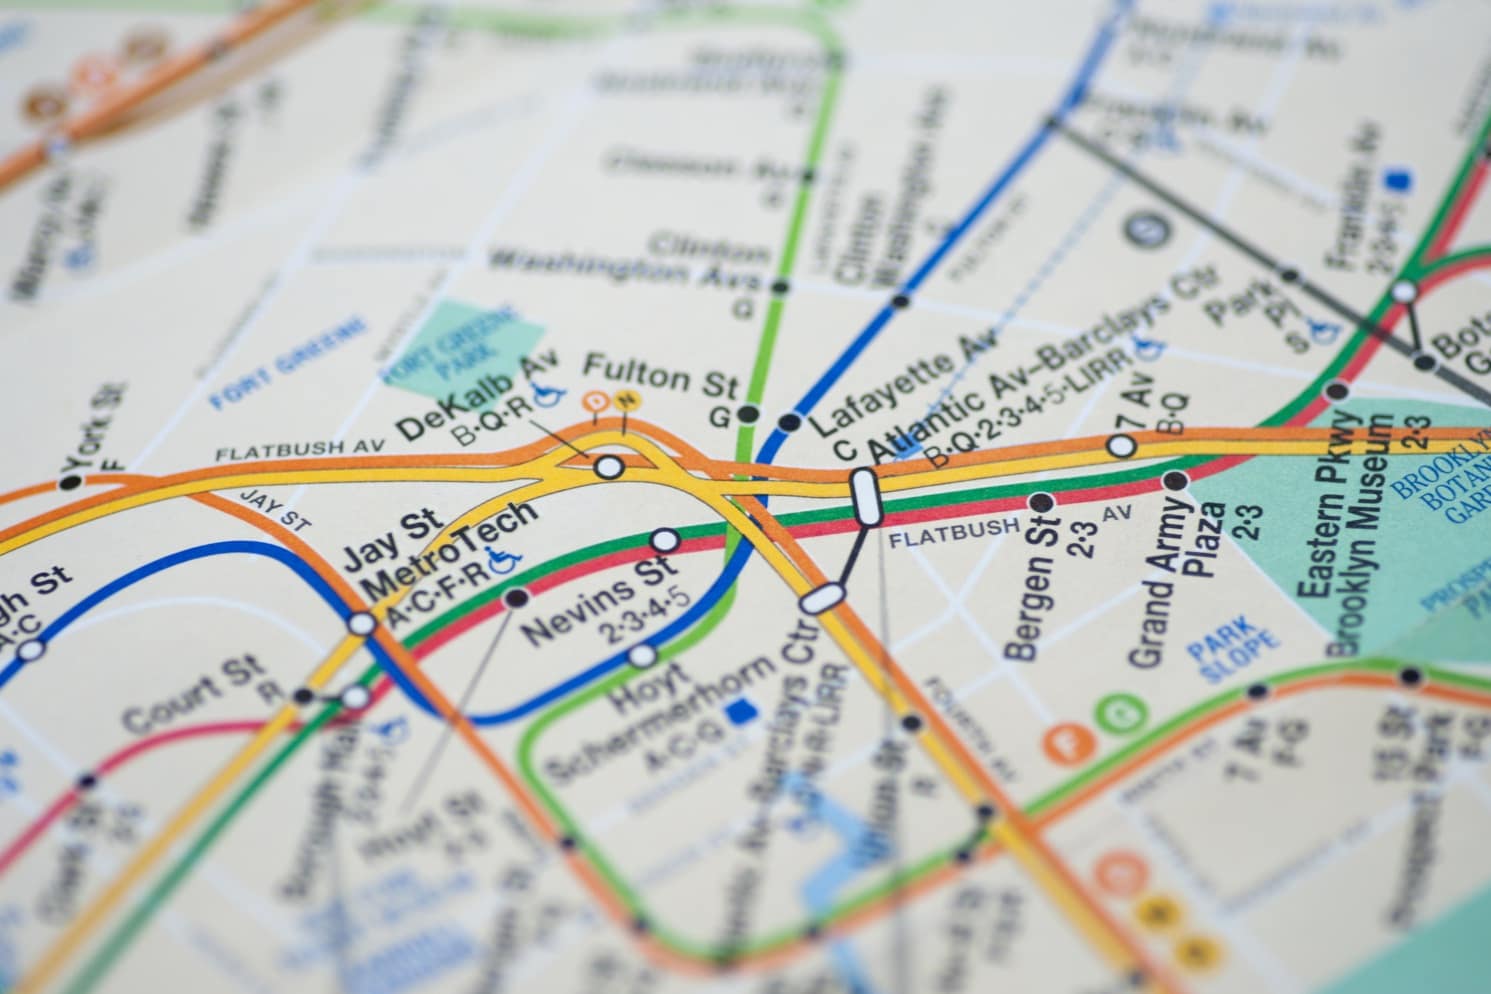 Close-up of a map of the New York City Subway